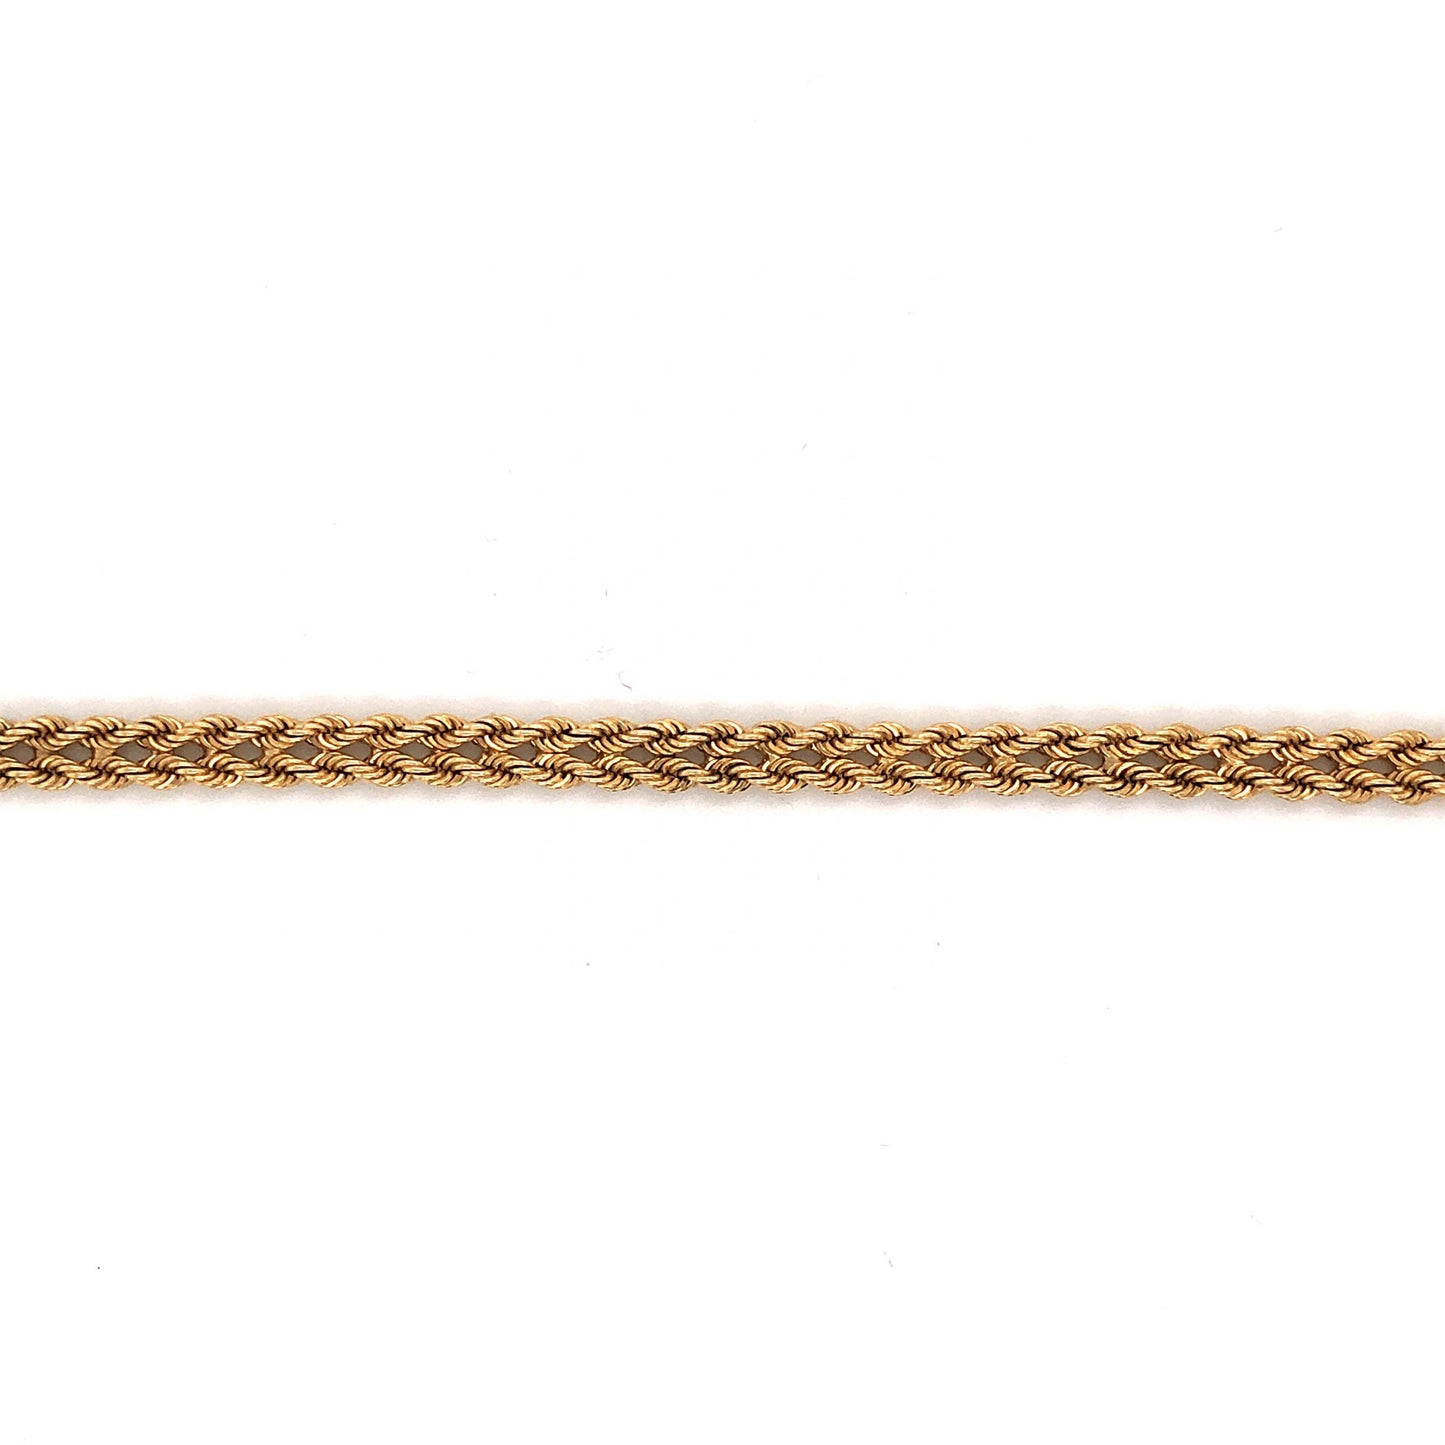 Pave Diamond Buckle Clasp Bracelet in 14k Yellow Gold